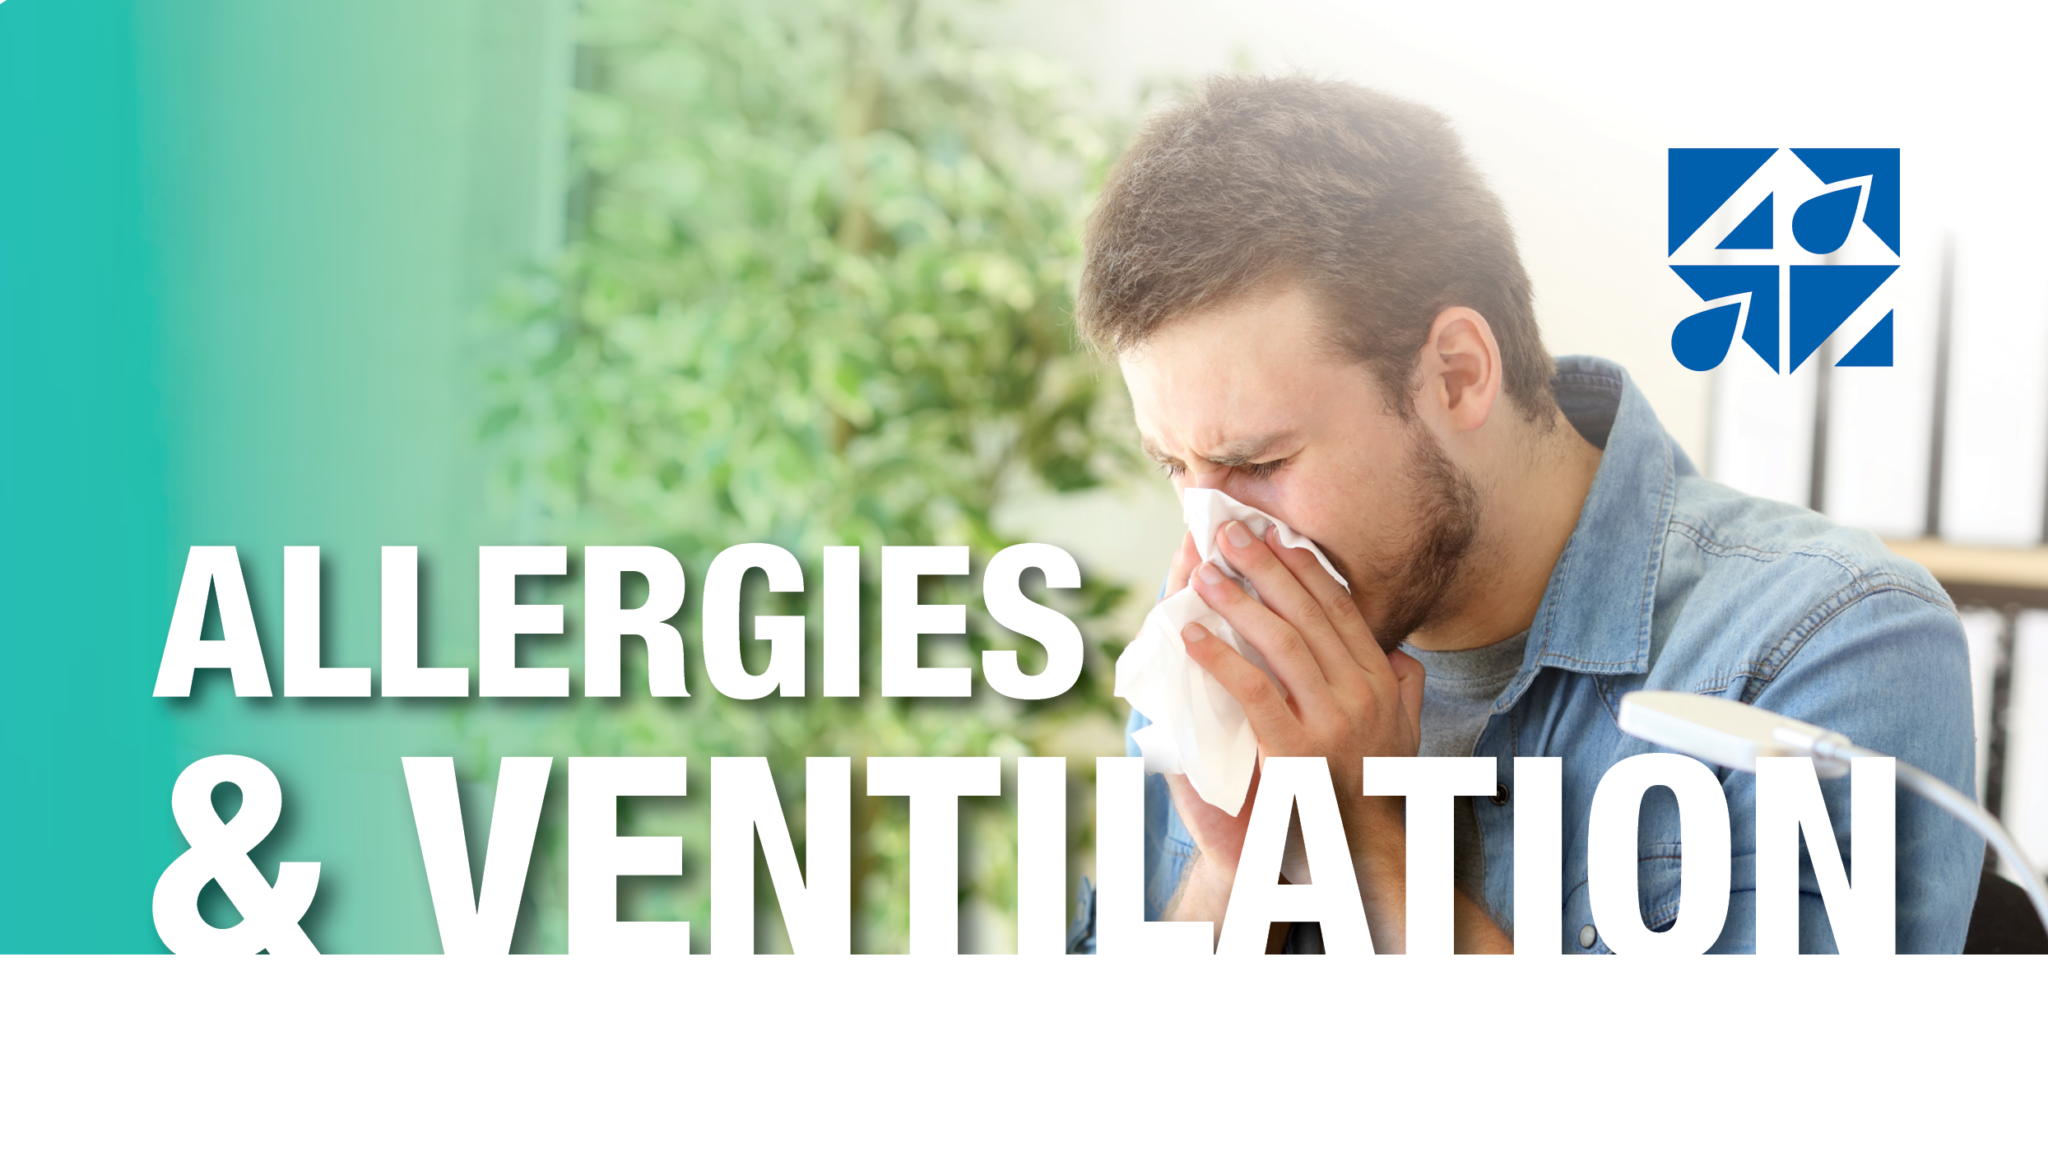 AN INCREASE IN ALLERGIES CALLS FOR INCREASED VENTILATION